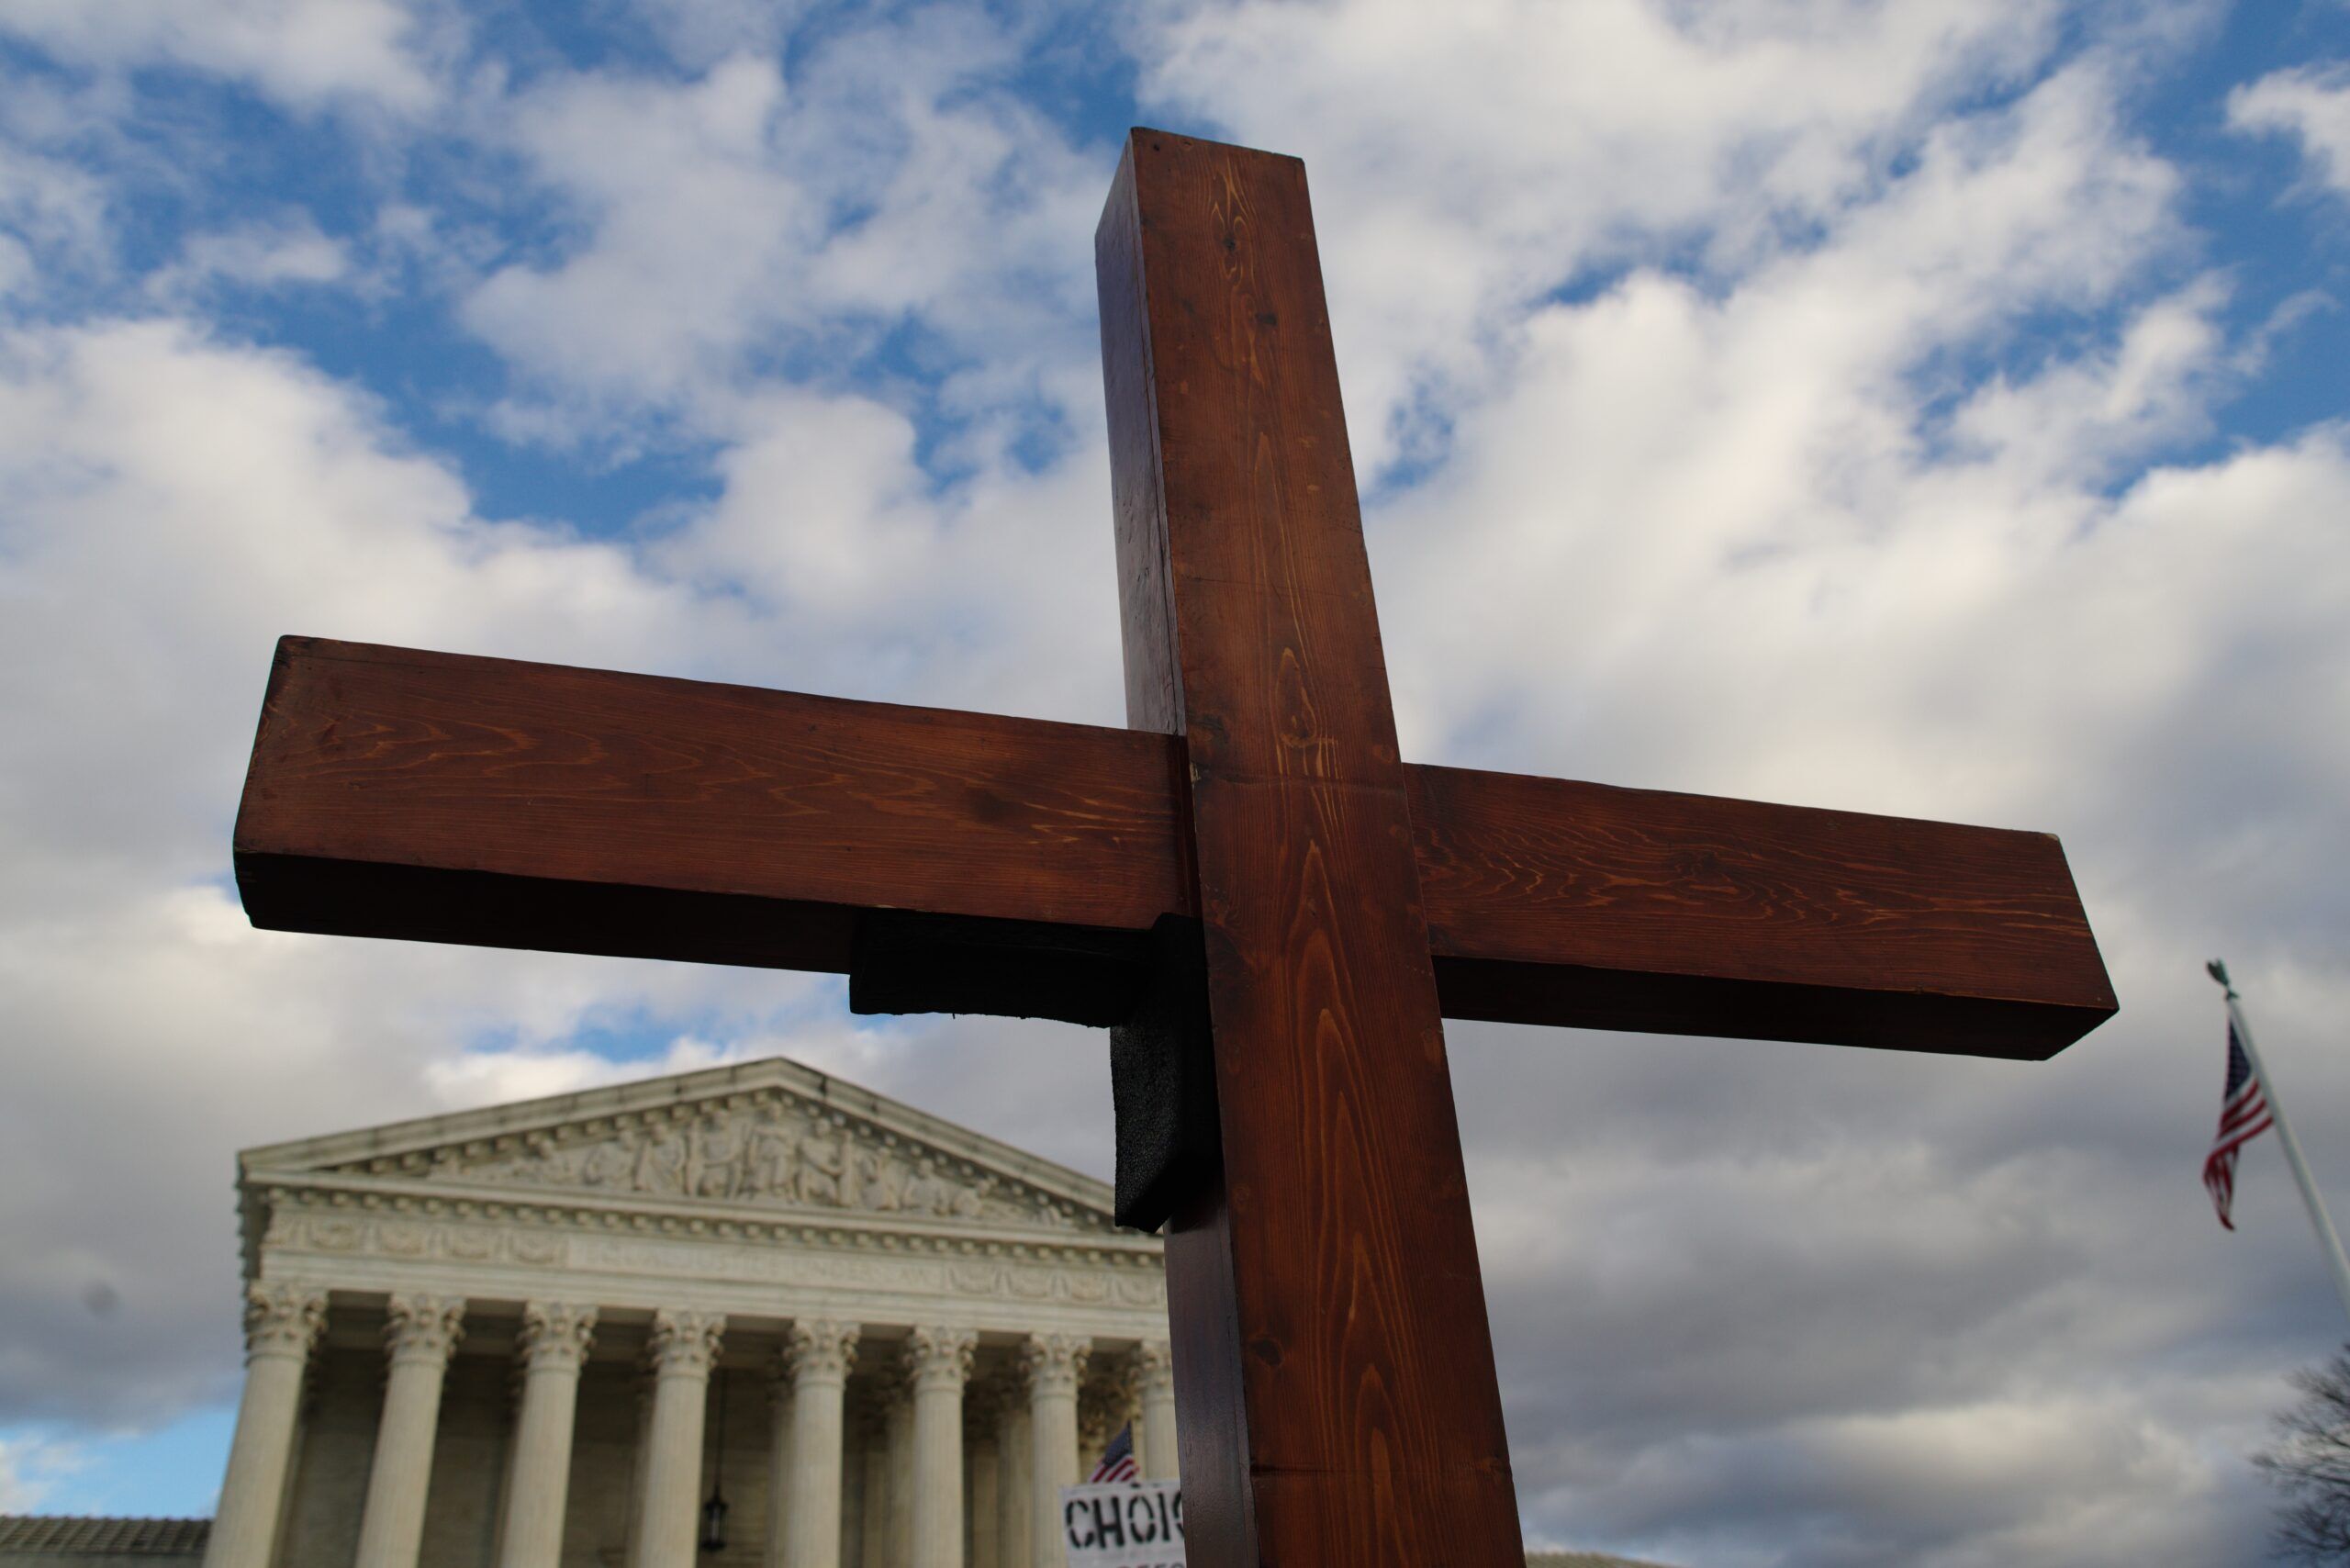 A crucifix in front of the U.S. Supreme Court